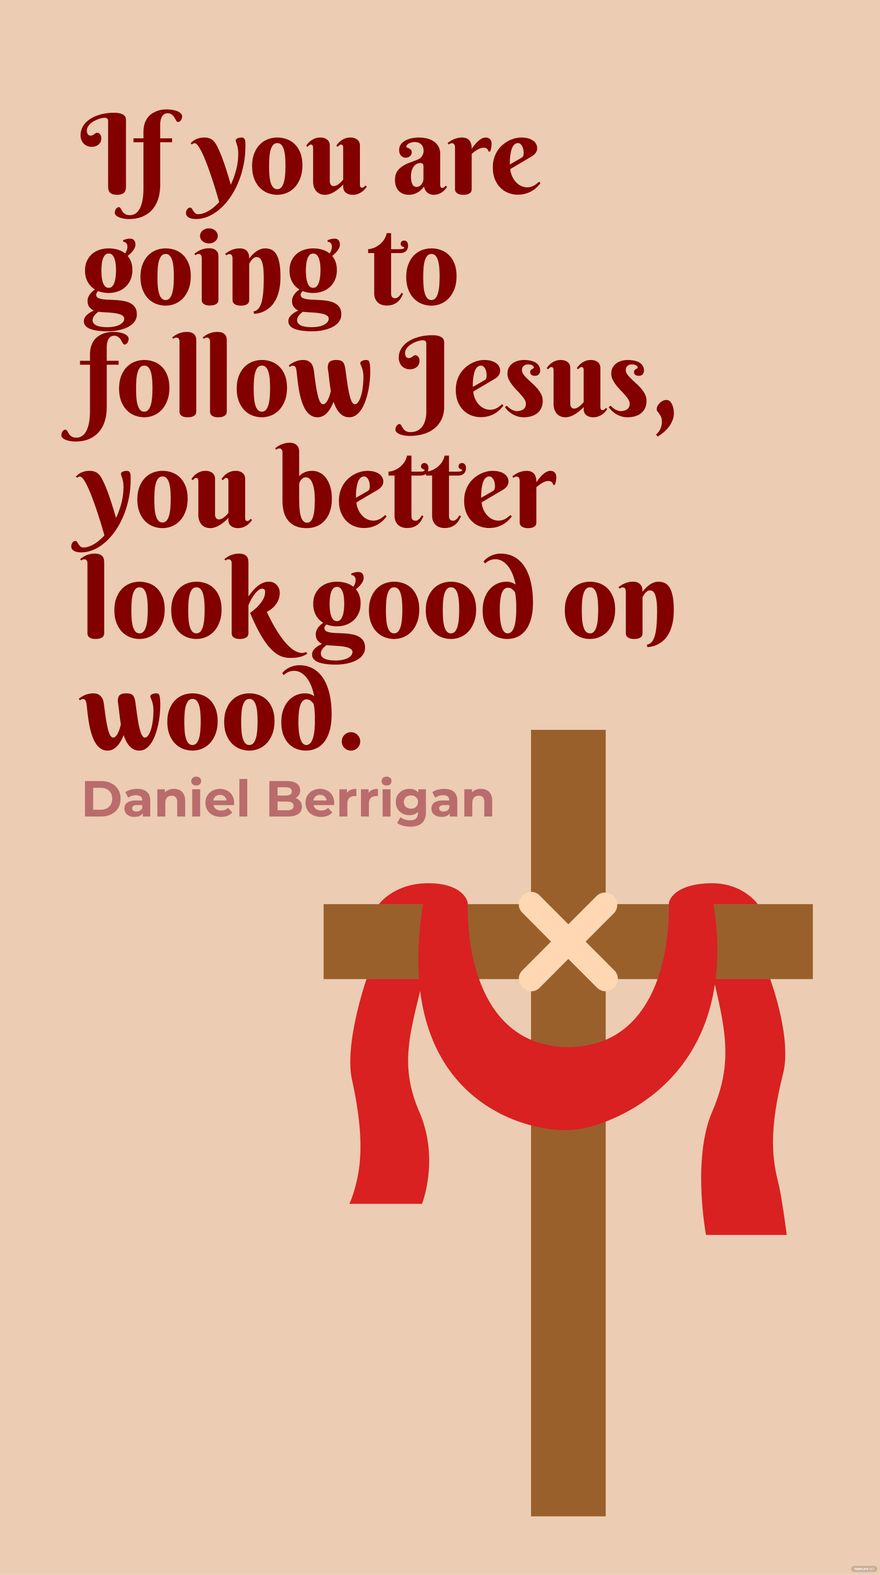 Daniel Berrigan - If you are going to follow Jesus, you better look good on wood.